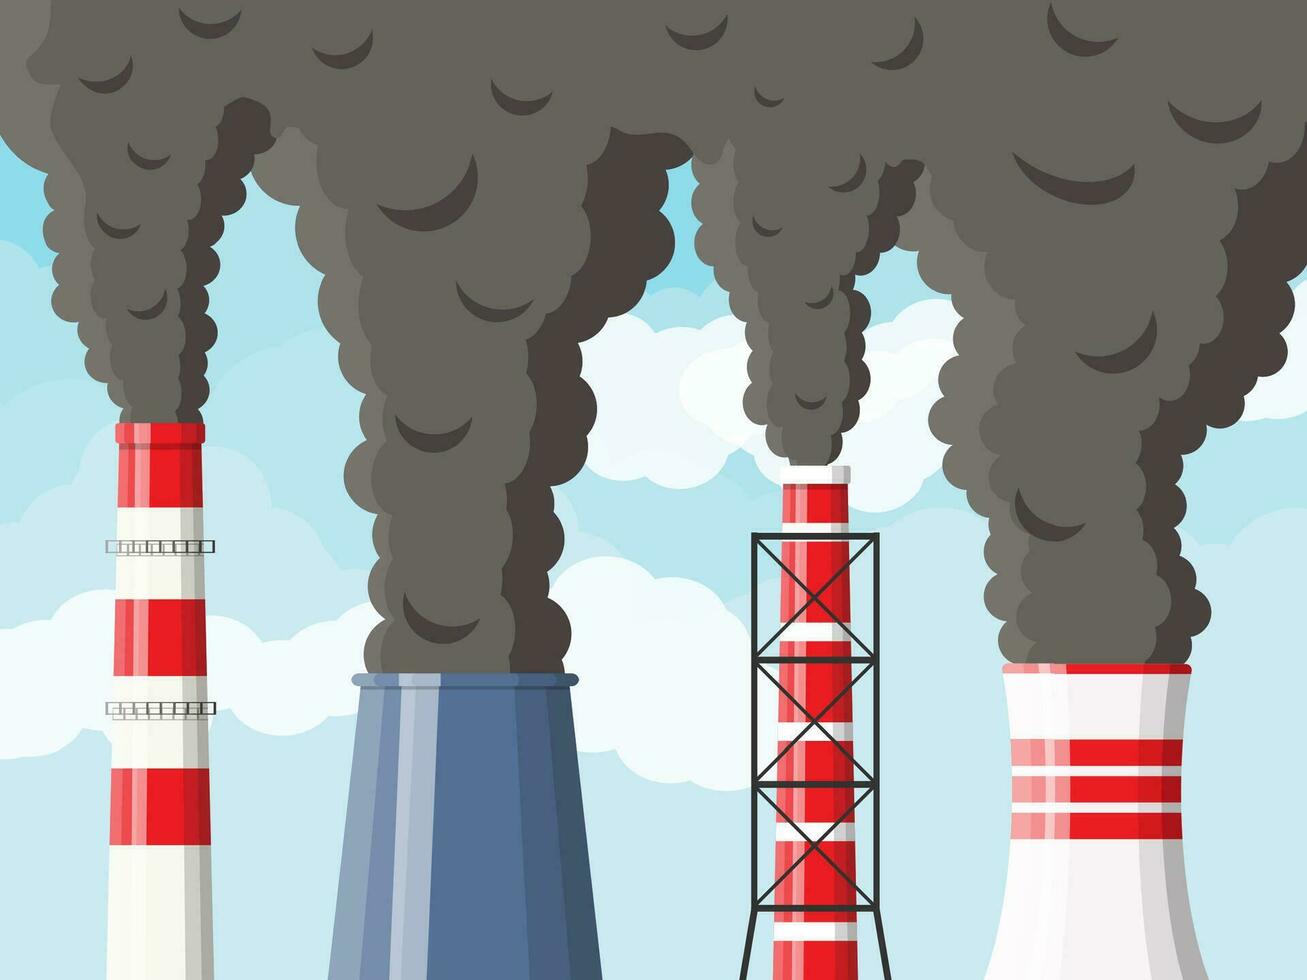 Smoking factory pipes against clear sky with clouds. Plant pipe with dark smoke. Carbon dioxide emissions. Environment contamination. Pollution of environment co2. Vector illustration in flat style